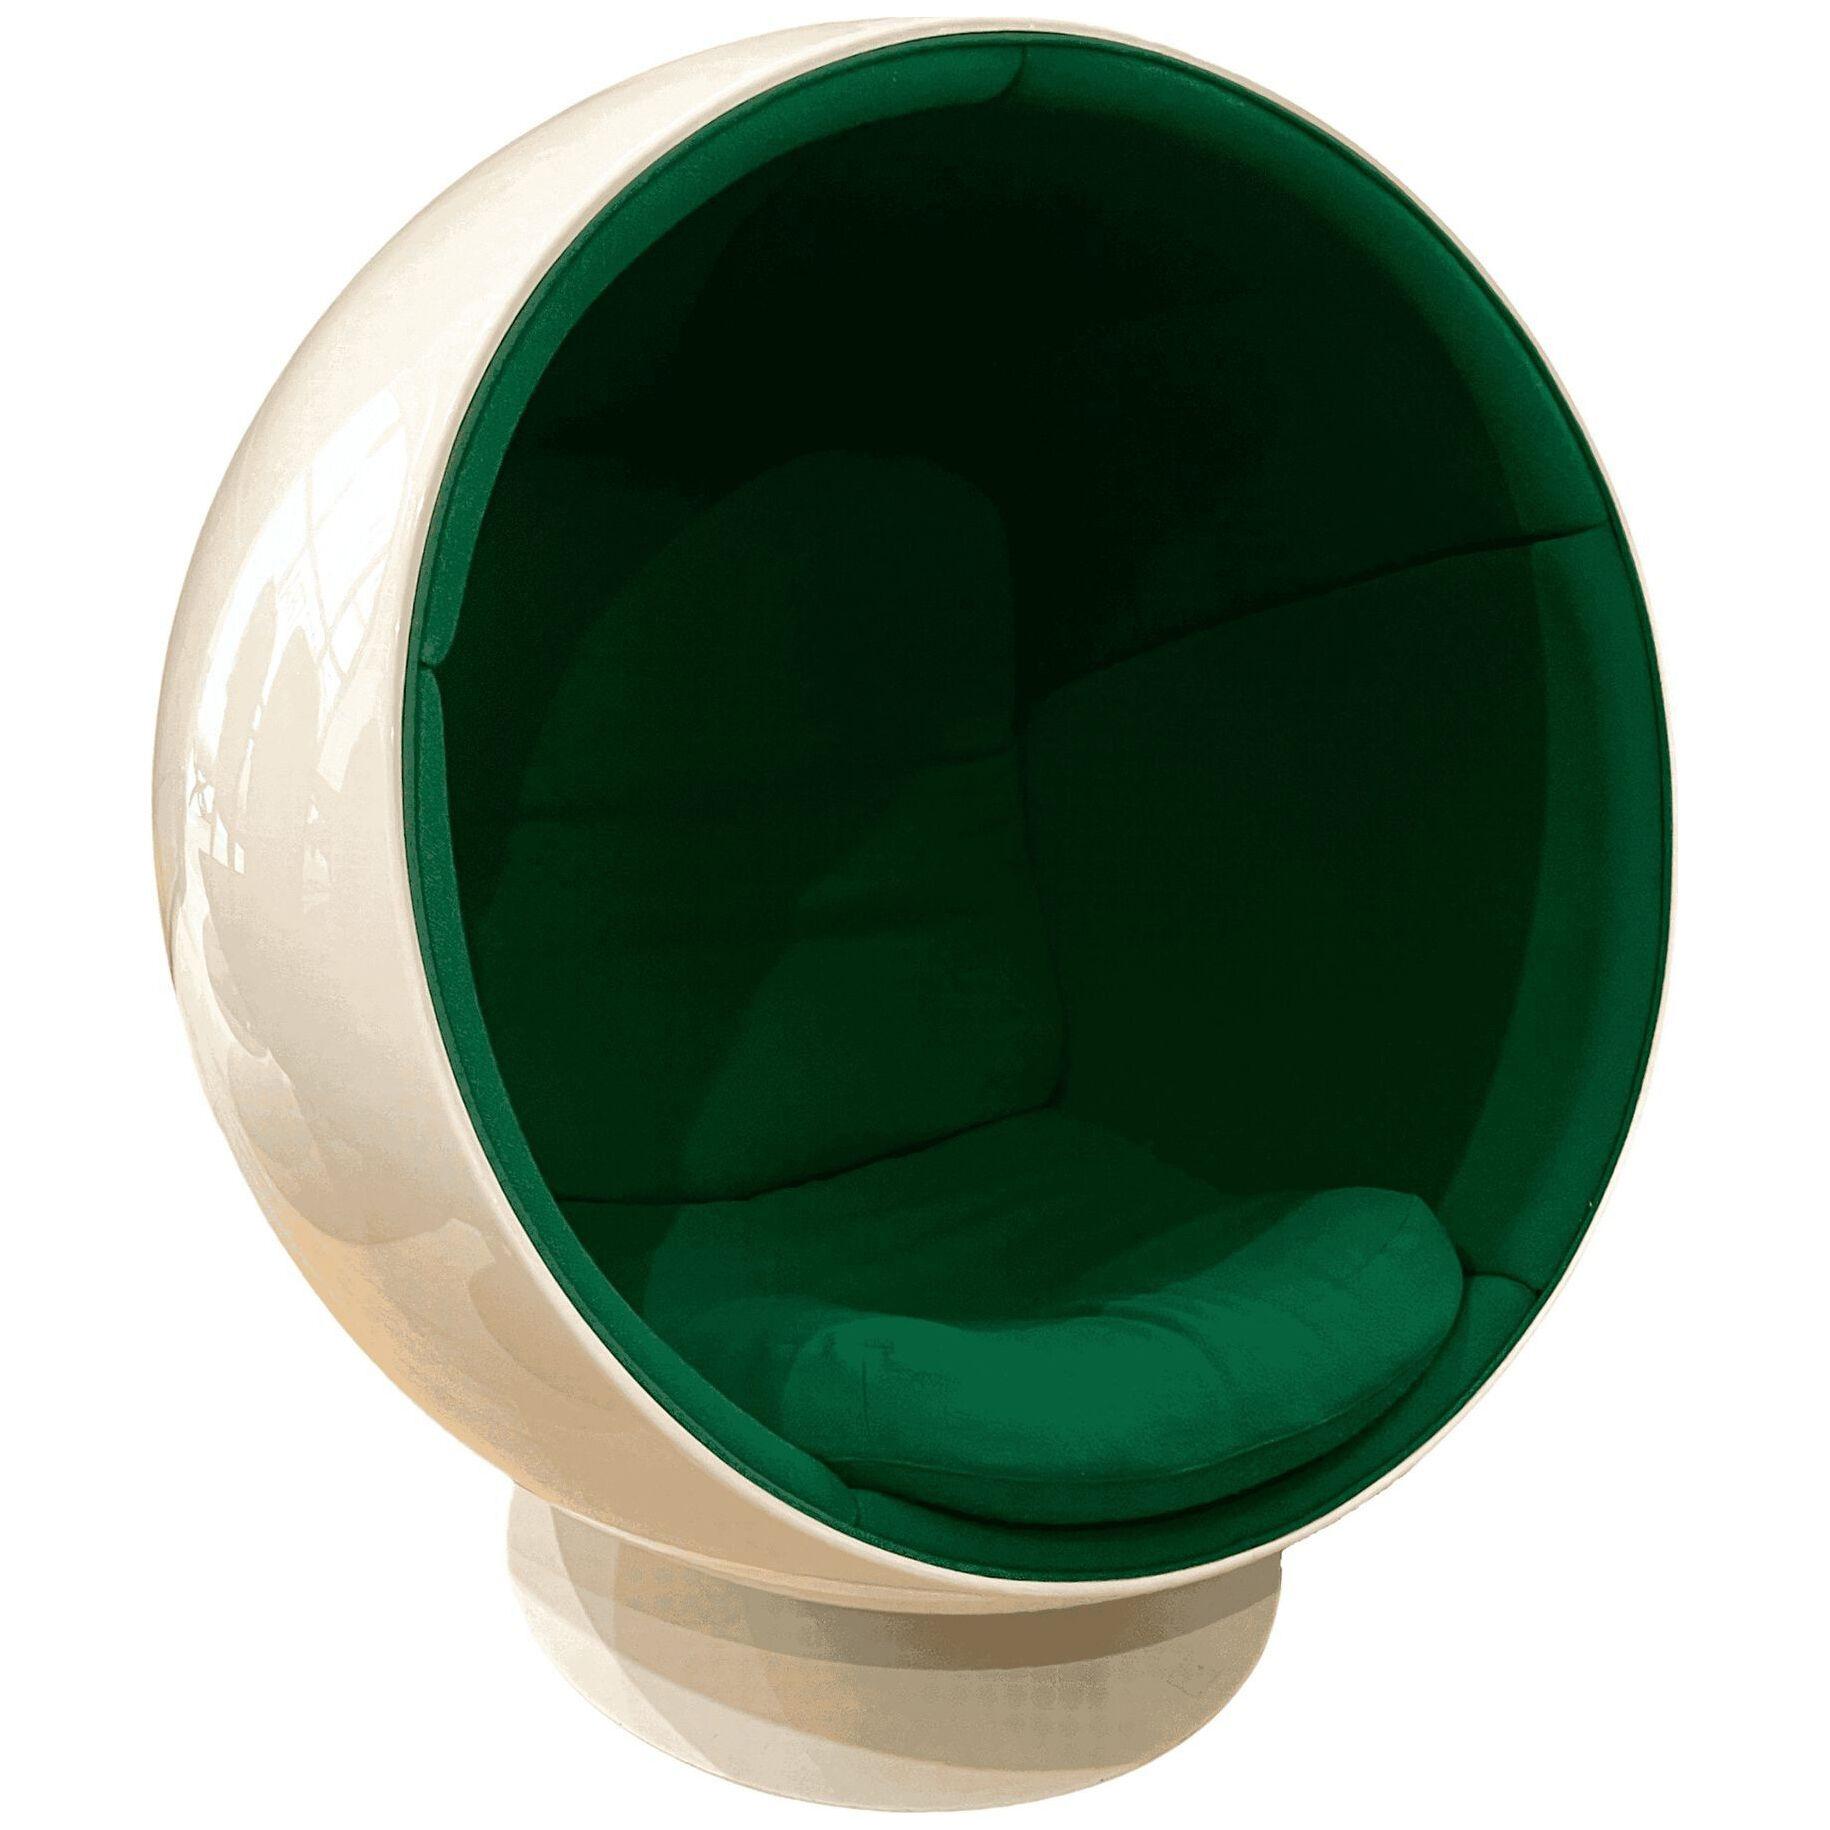 Ball Chair by Eero Aarnio, Green and White, Adelta, Finland circa 1980/90s